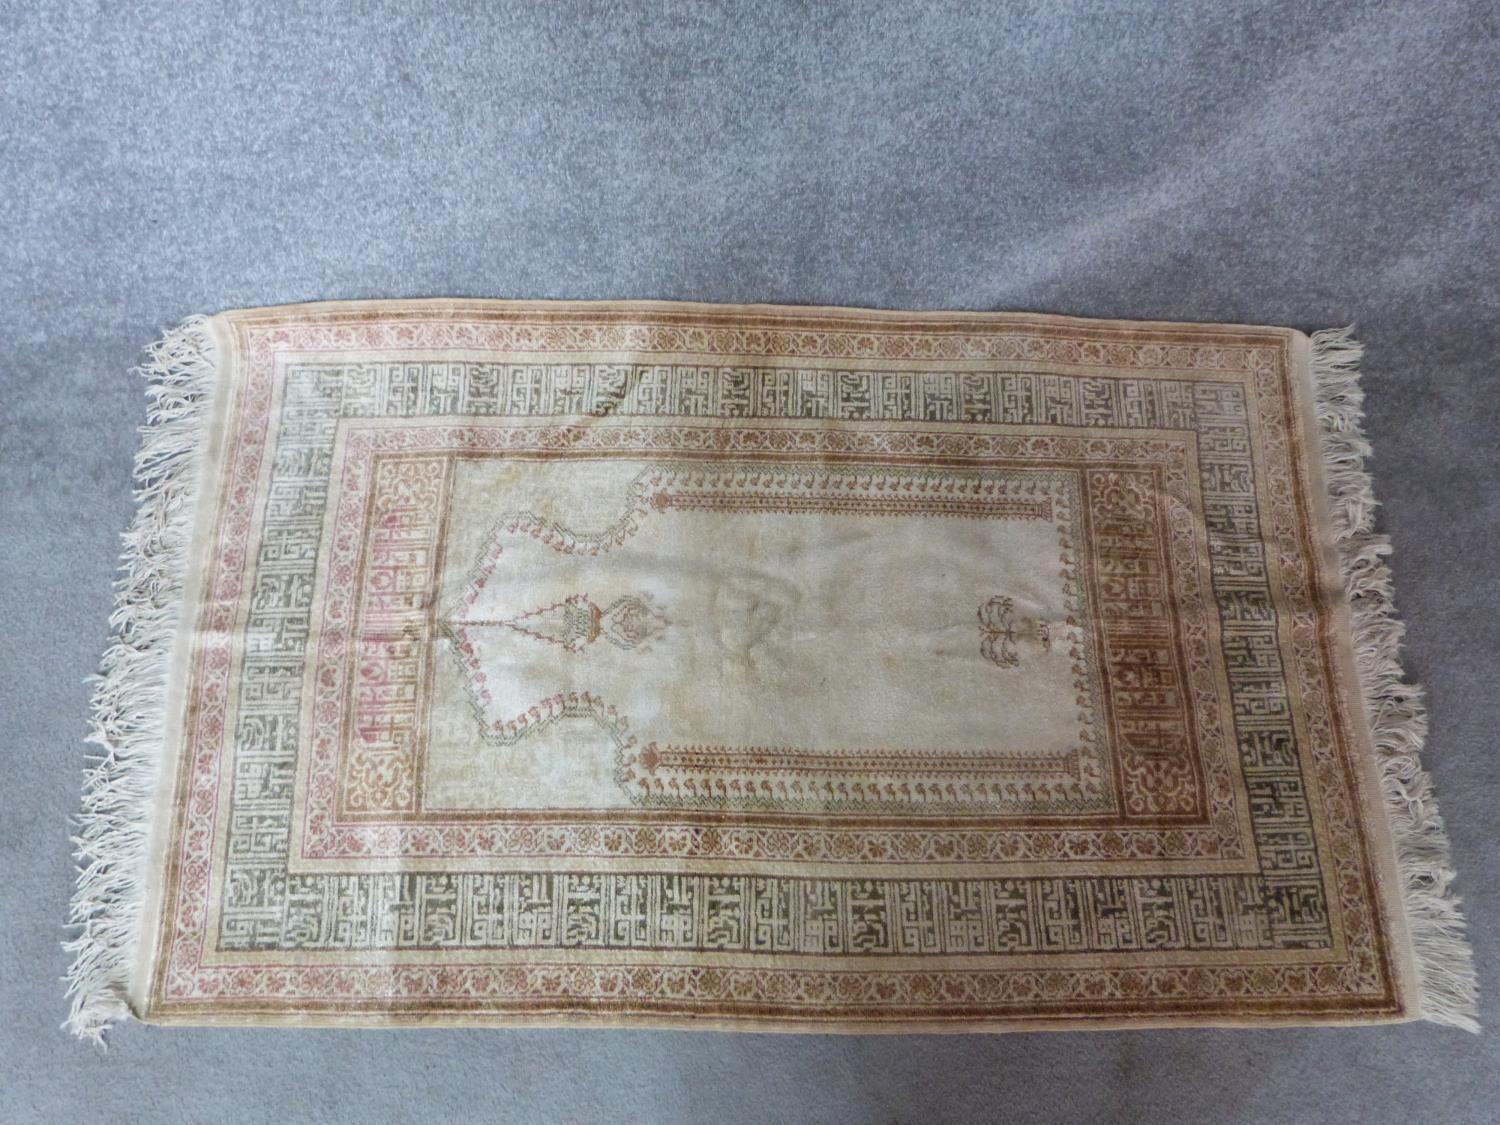 A woven Turkish prayer rug with Mehrab and lamp, mosque and calligraphy border design. 154x88